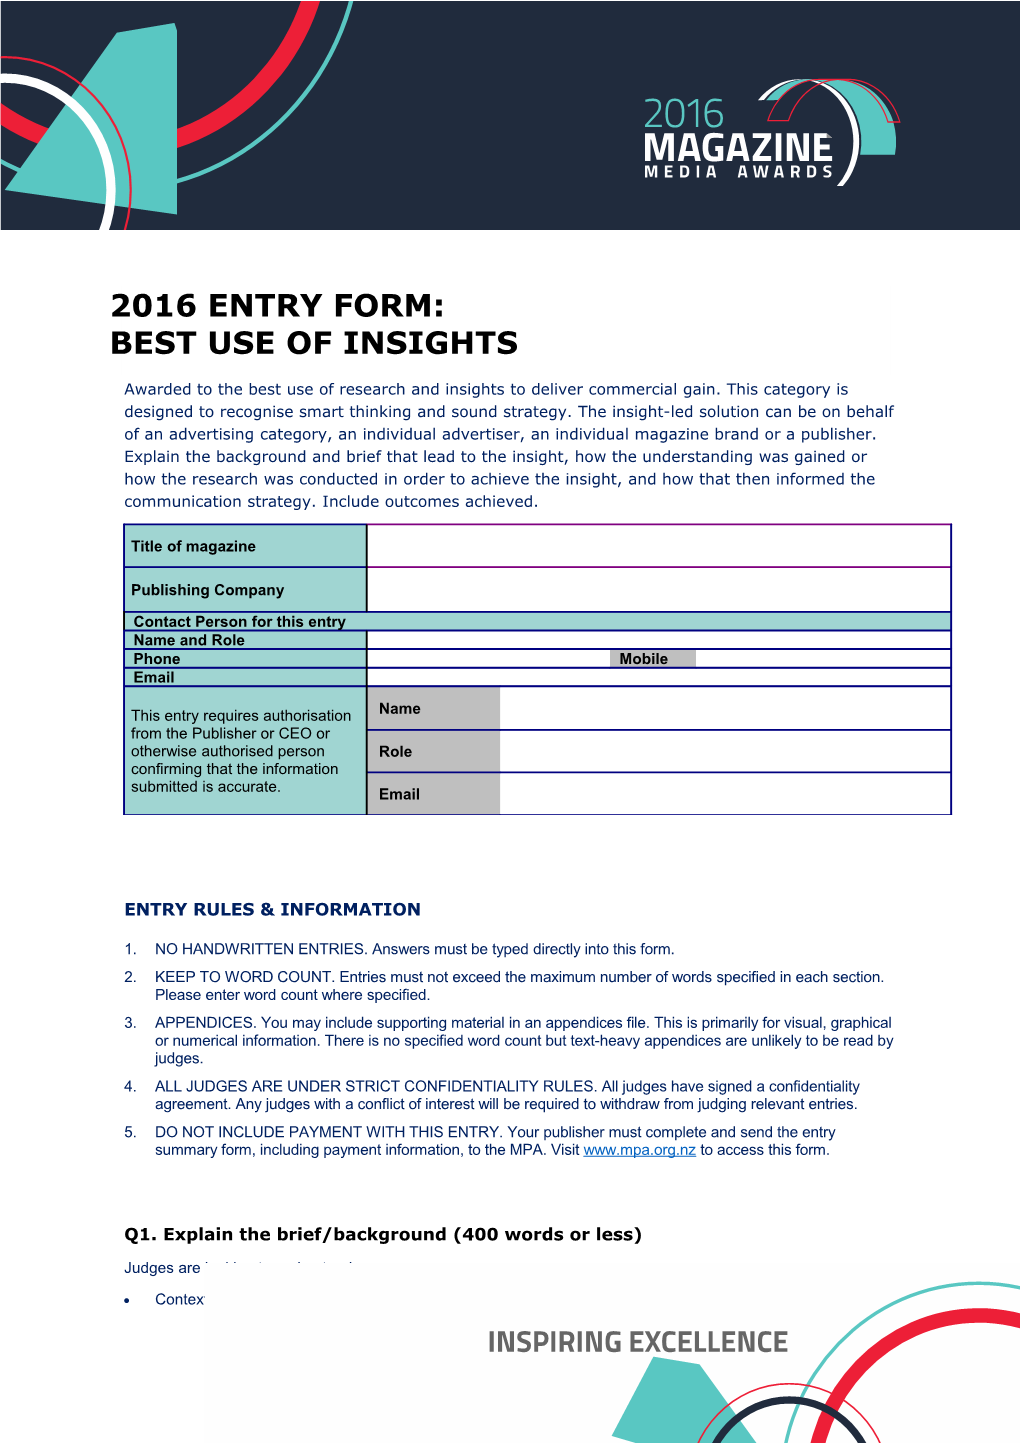 Entry Rules & Information